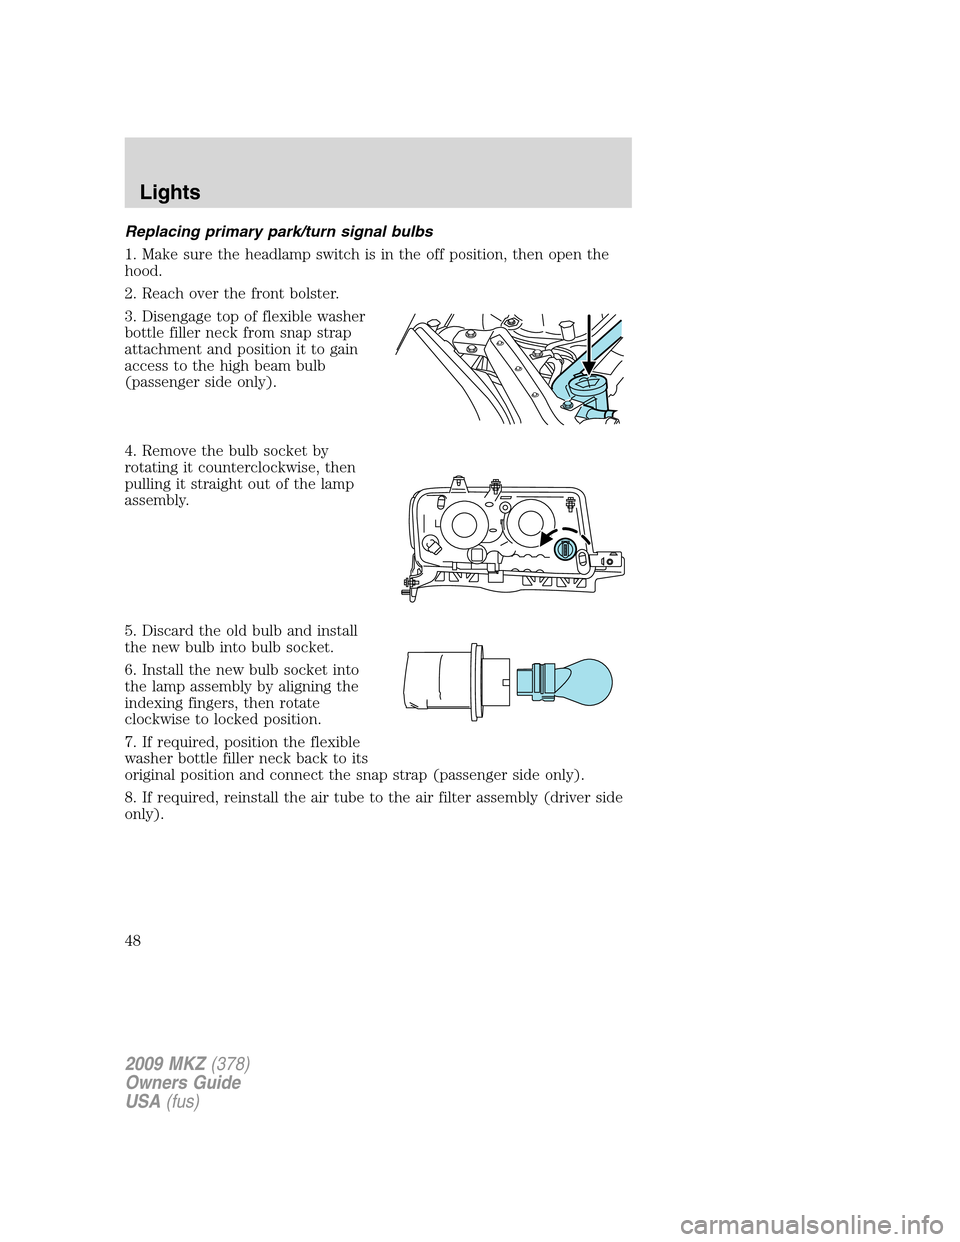 LINCOLN MKZ 2009  Owners Manual Replacing primary park/turn signal bulbs
1. Make sure the headlamp switch is in the off position, then open the
hood.
2. Reach over the front bolster.
3. Disengage top of flexible washer
bottle filler